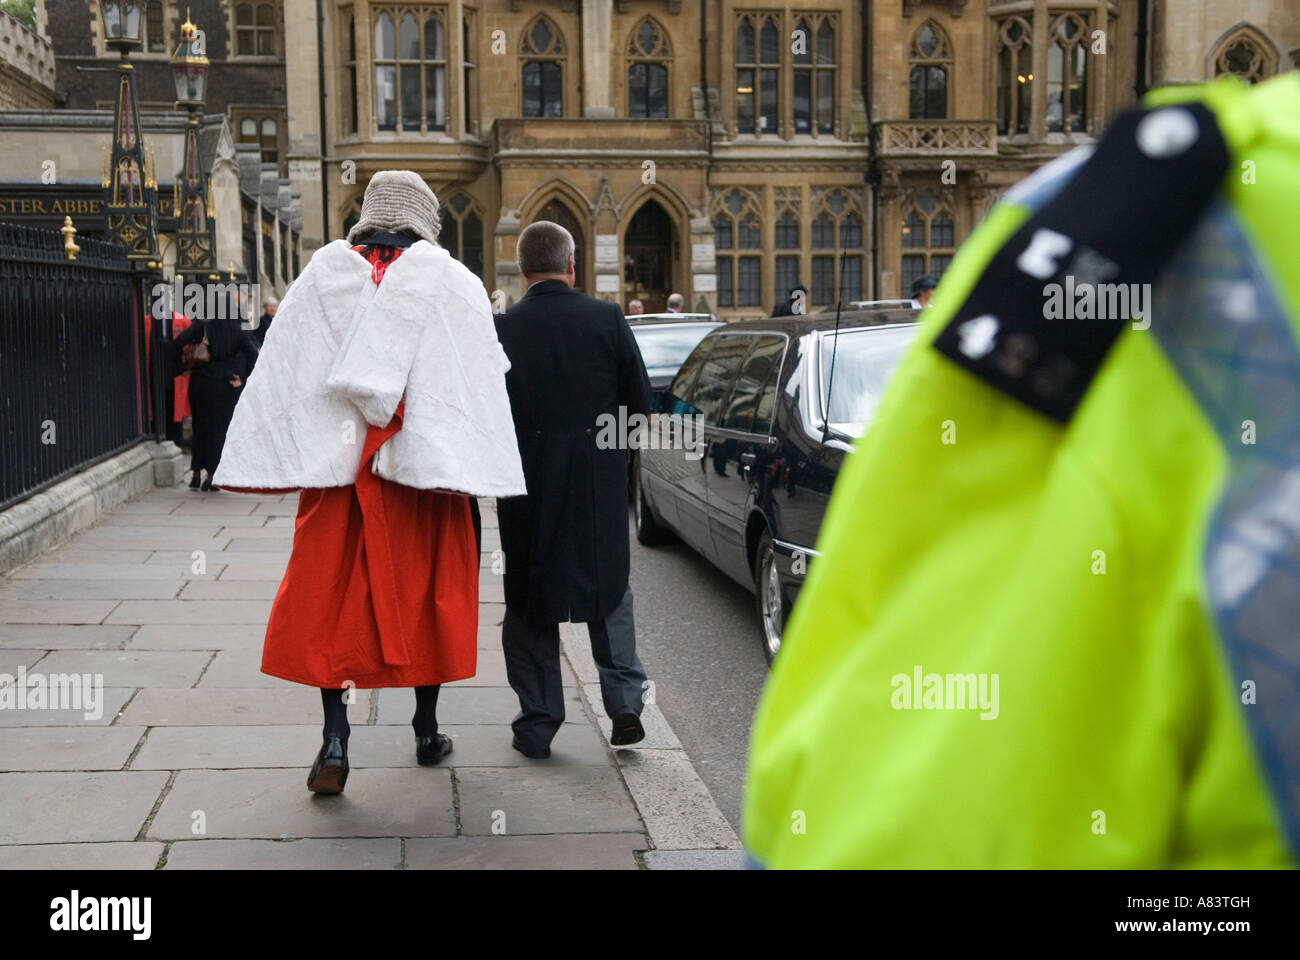 Lord Chancellors Breakfast, a High Court Judge arrives at Westminster Abbey, police officer on duty London England 2006 2000s UK HOMER SYKES Stock Photo